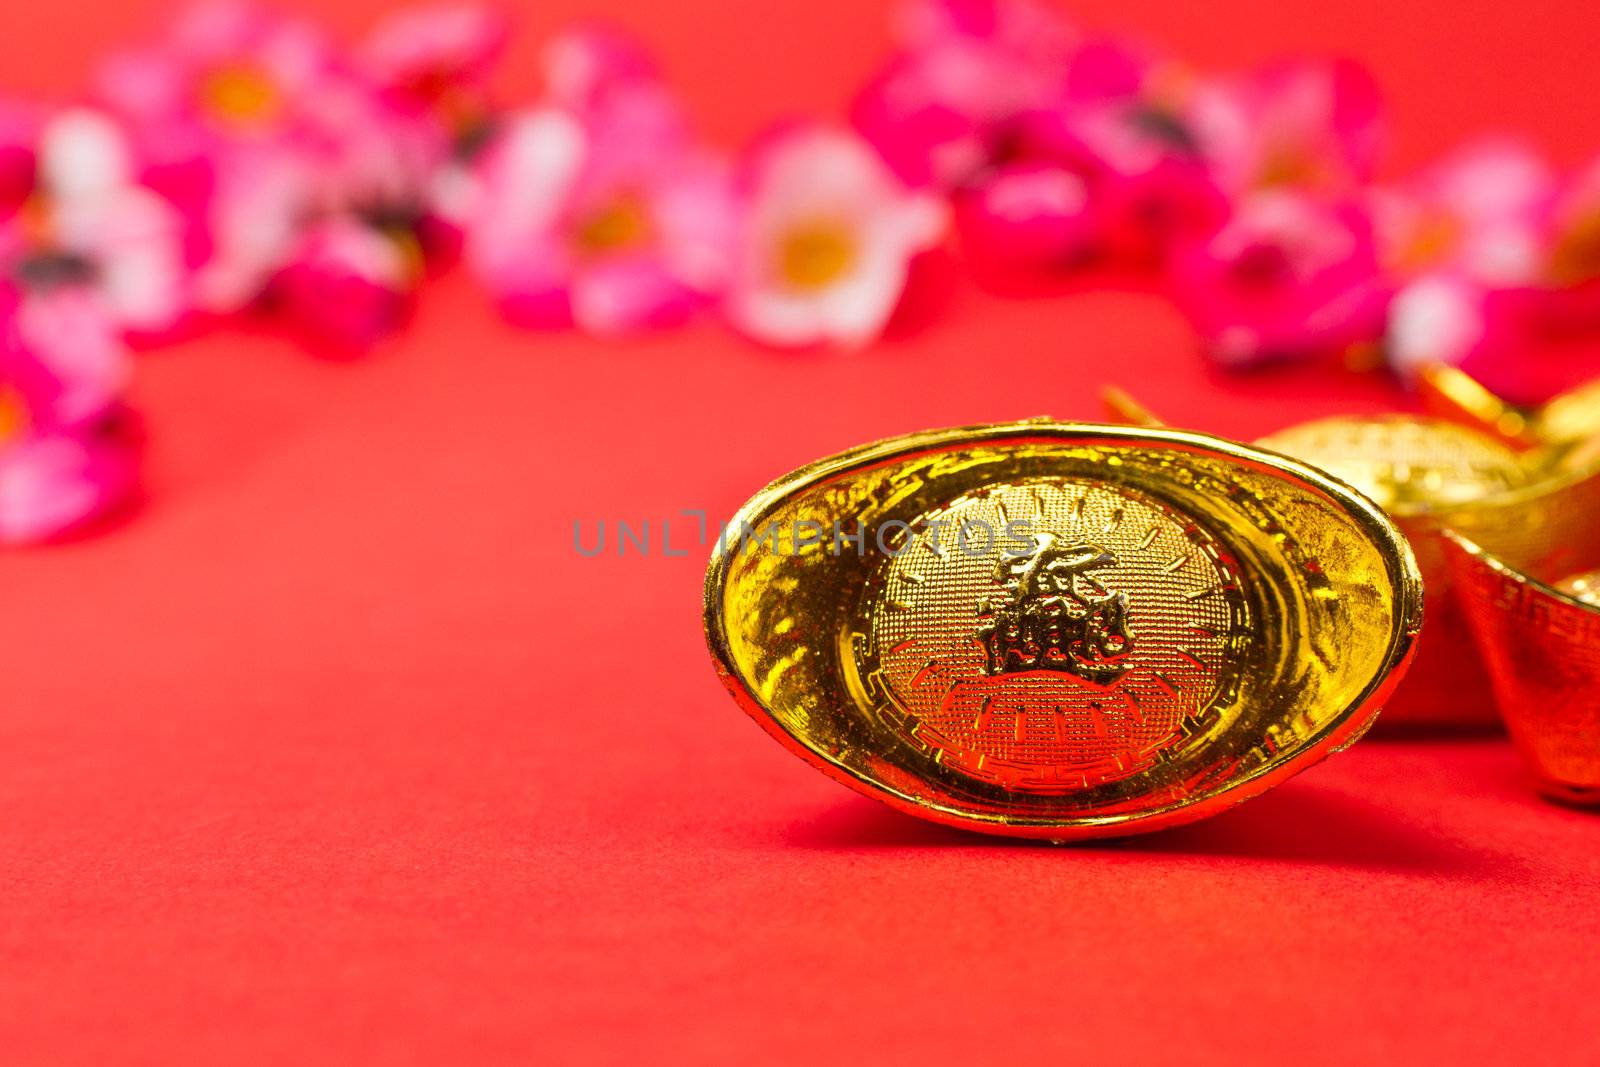 Golden Chinese new Year Ingots on red surface with plum blossoms in background